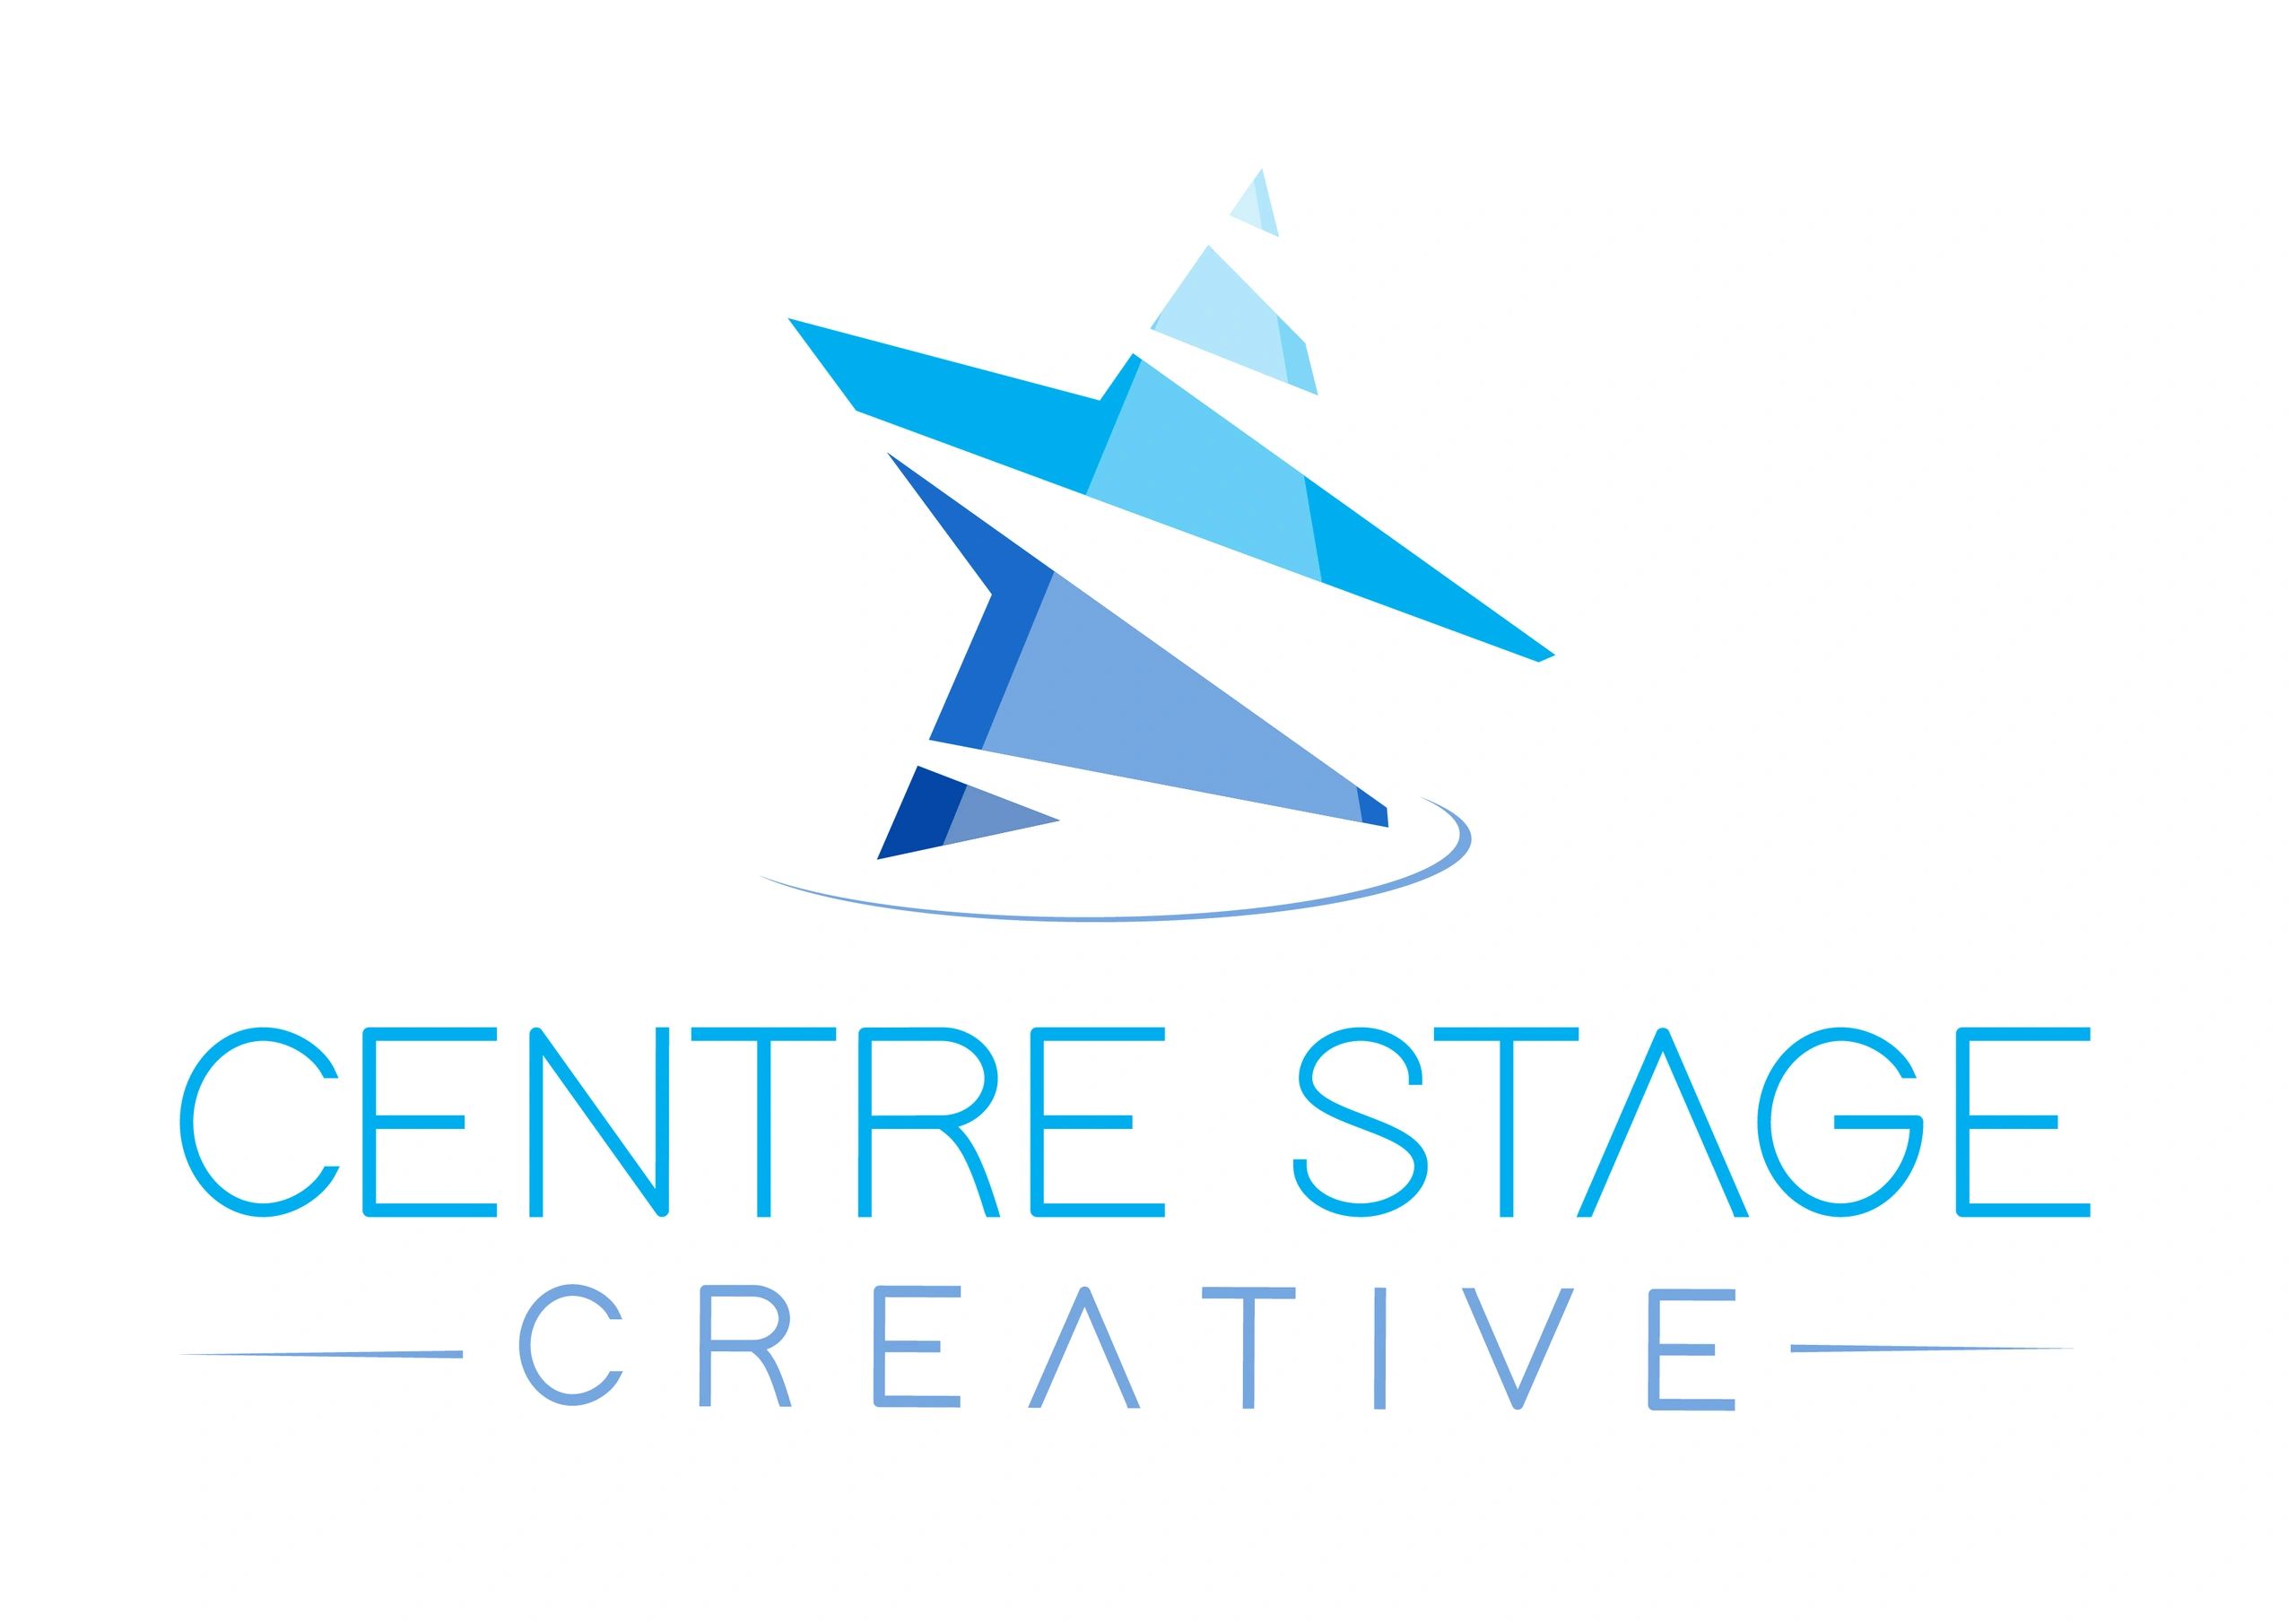 Centre Stage Creative can help your small business with social media and website content